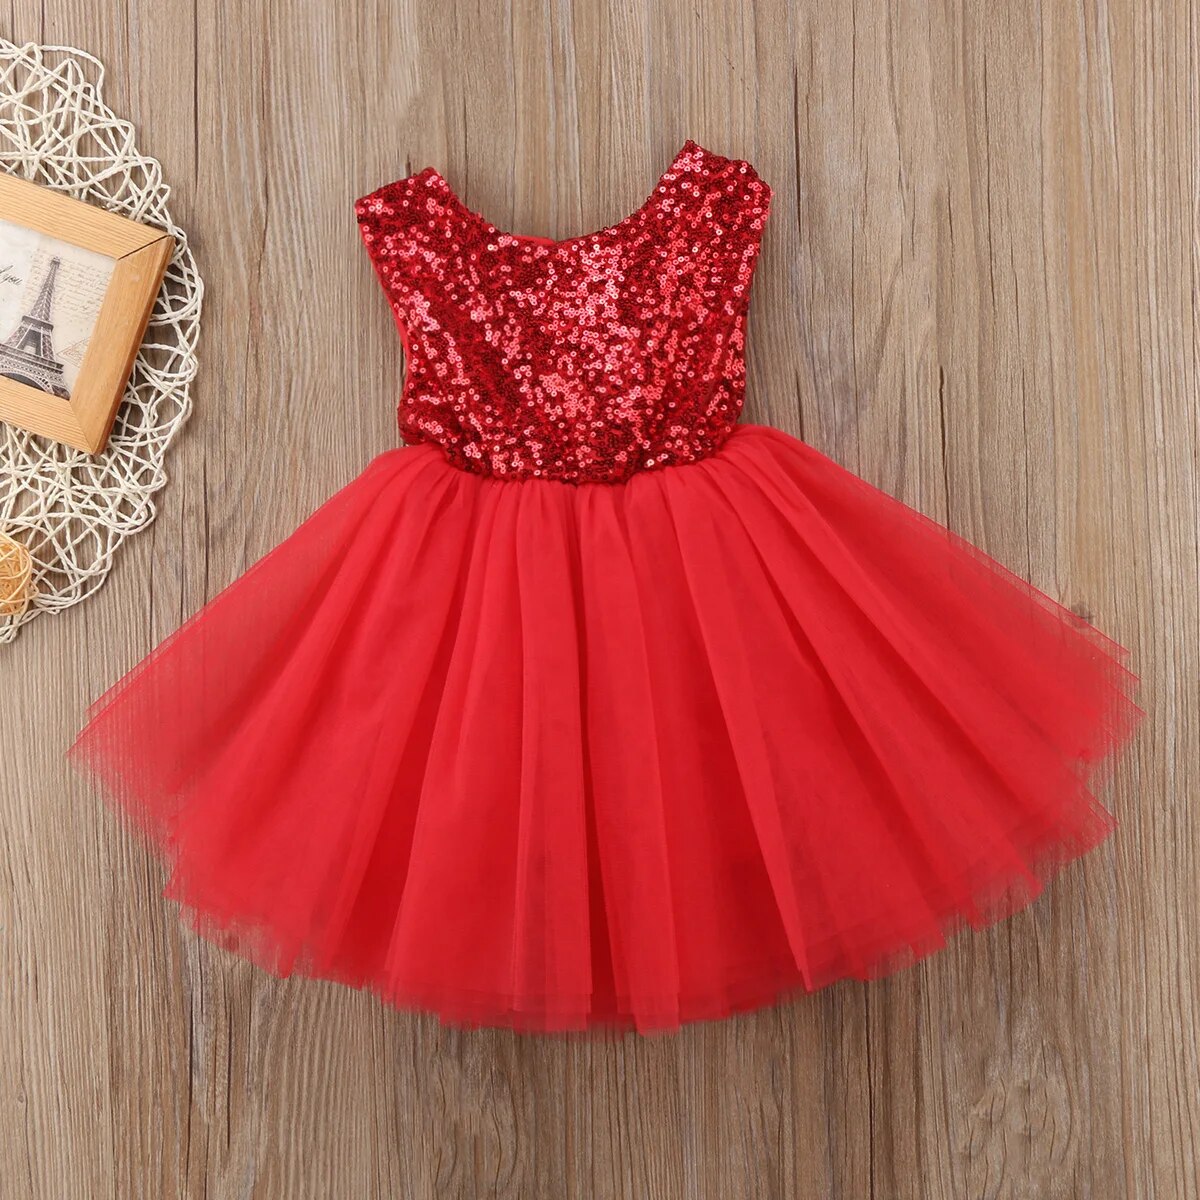 Toddler Girl Birthday Tulle Princess Pink Dress Baby Bowknot Dresses